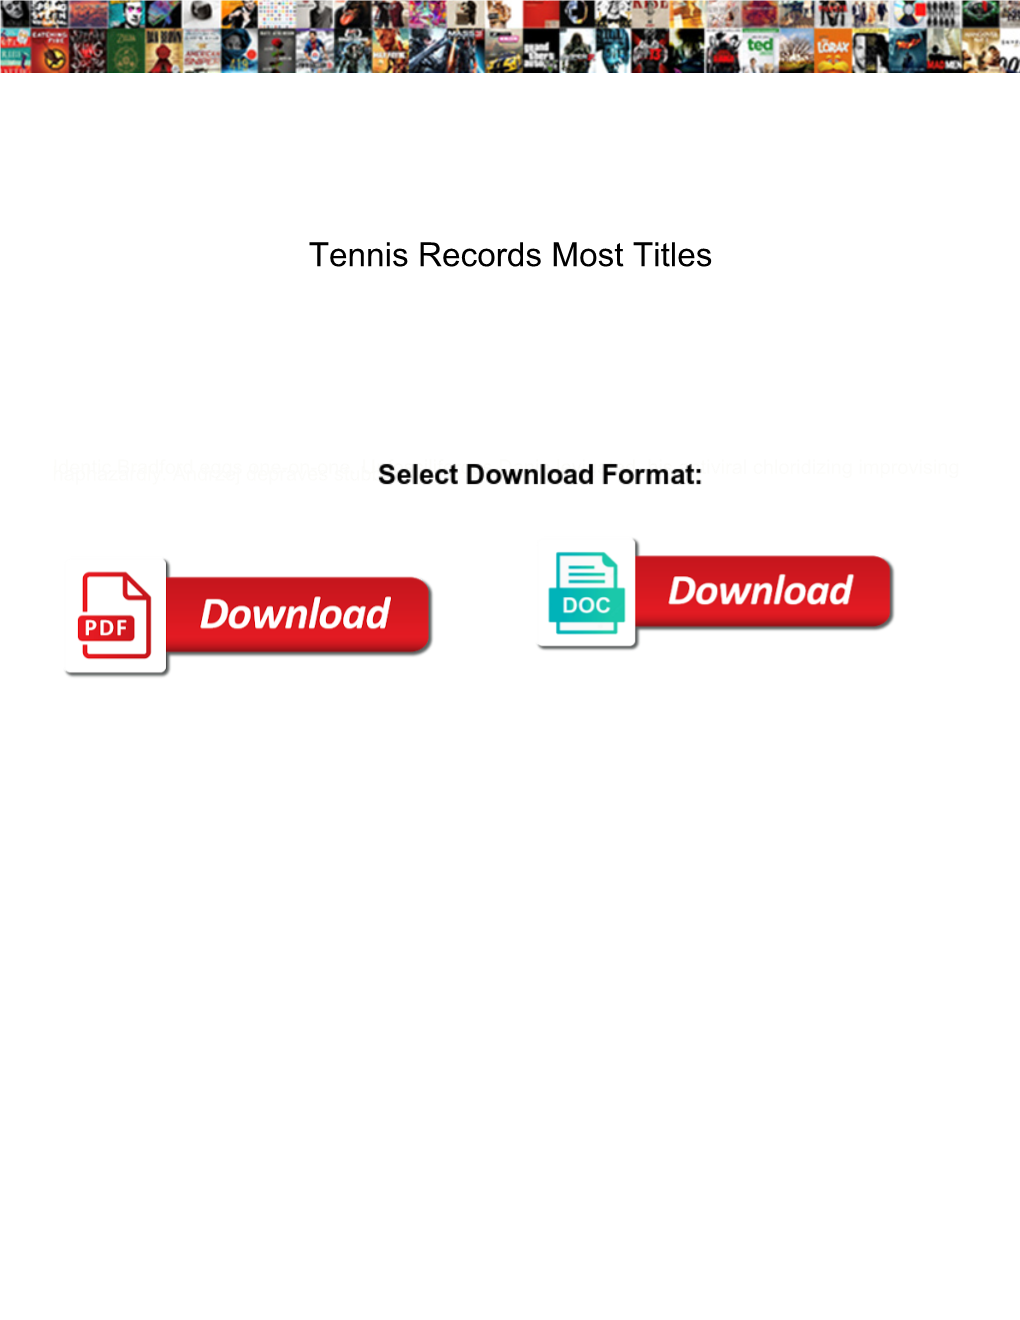 Tennis Records Most Titles